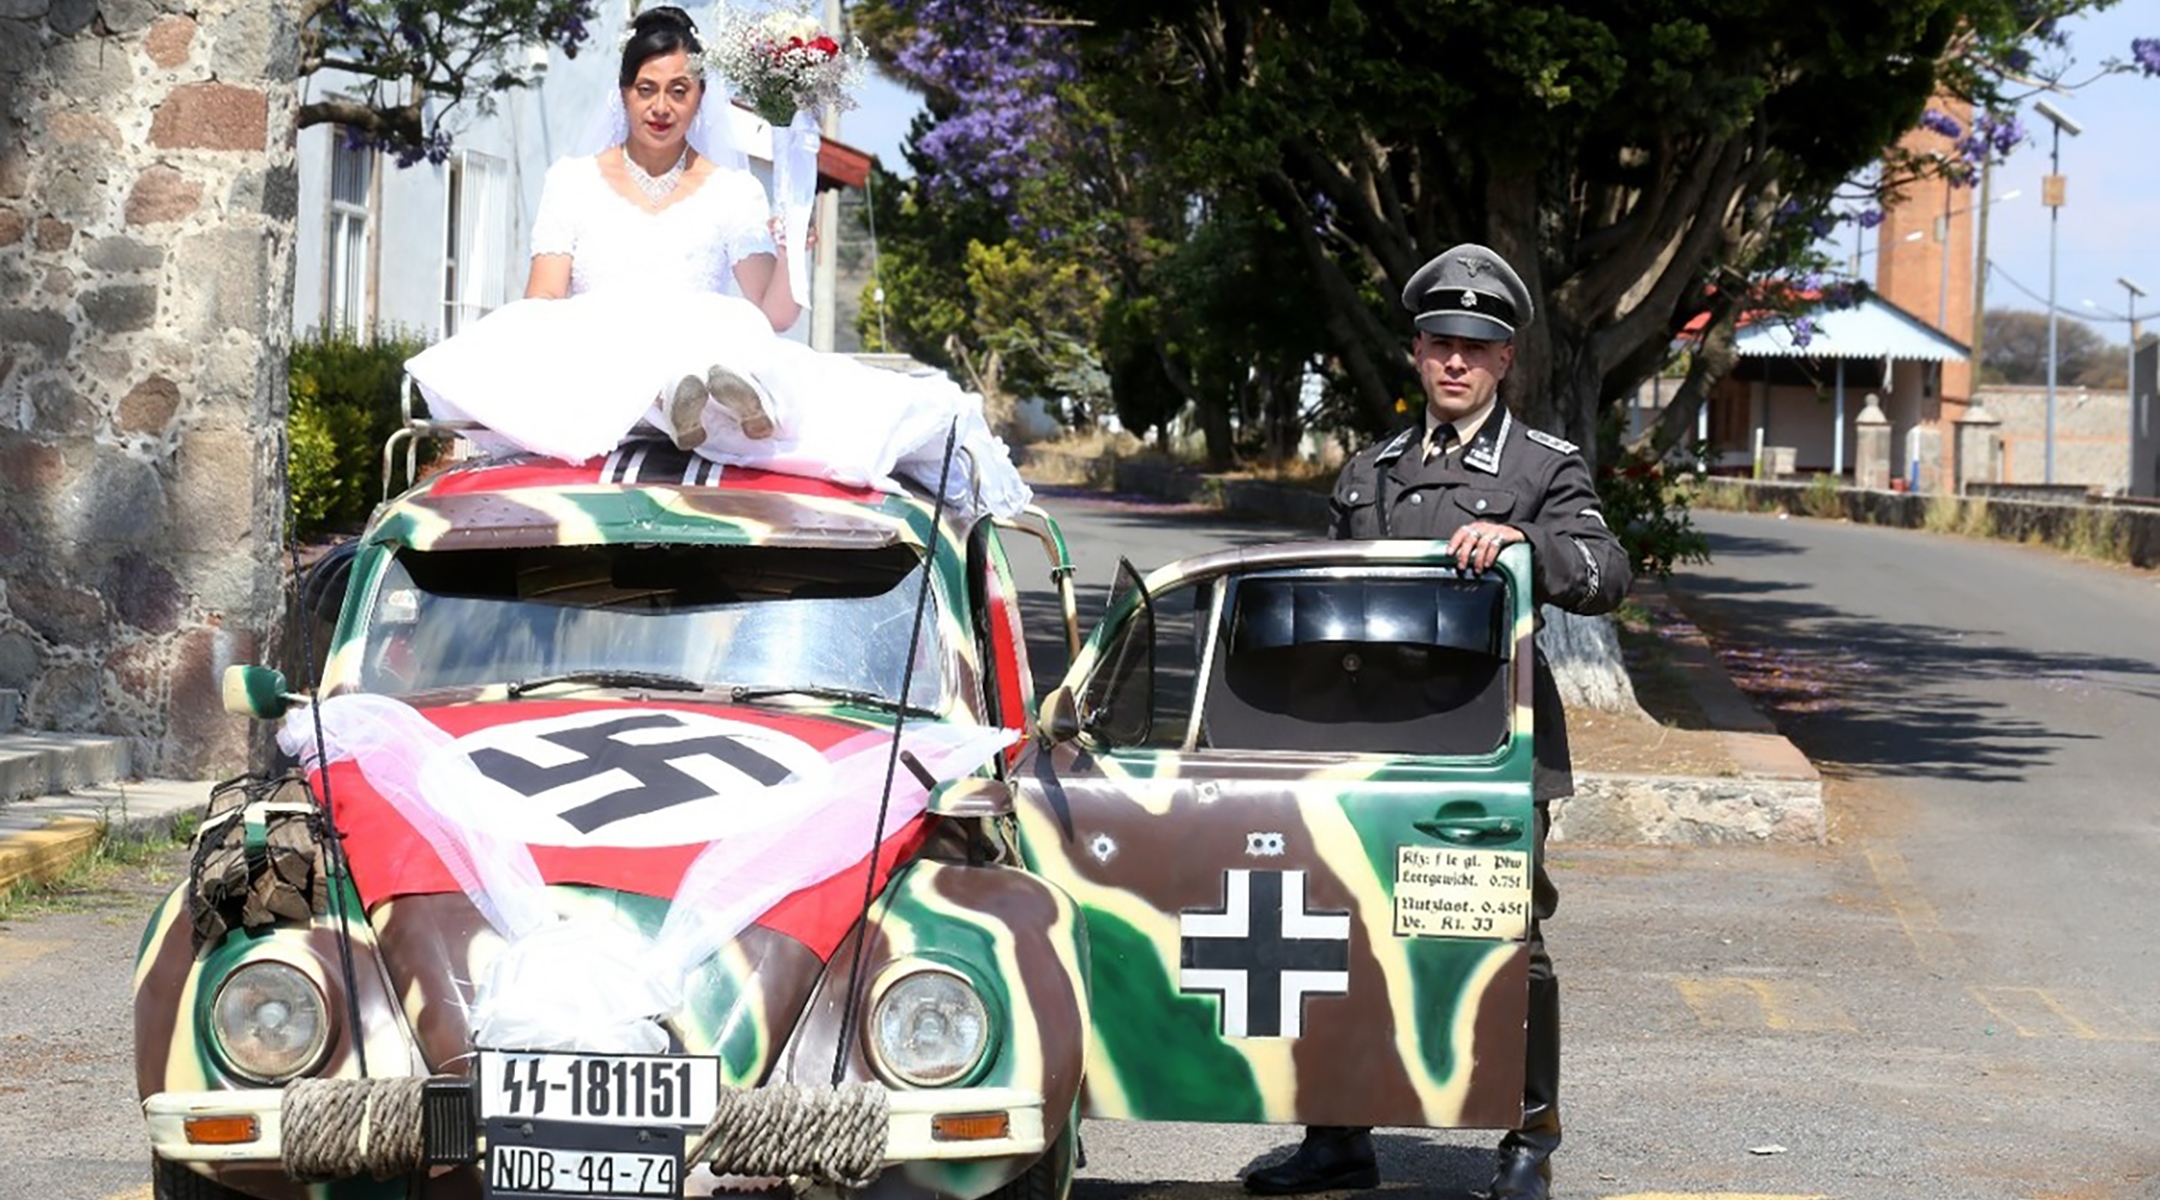 Fernando and Josefina married in a Nazi-themed wedding in Tlaxcala, Mexico, April 29, 2022. (Jorge Carballo)